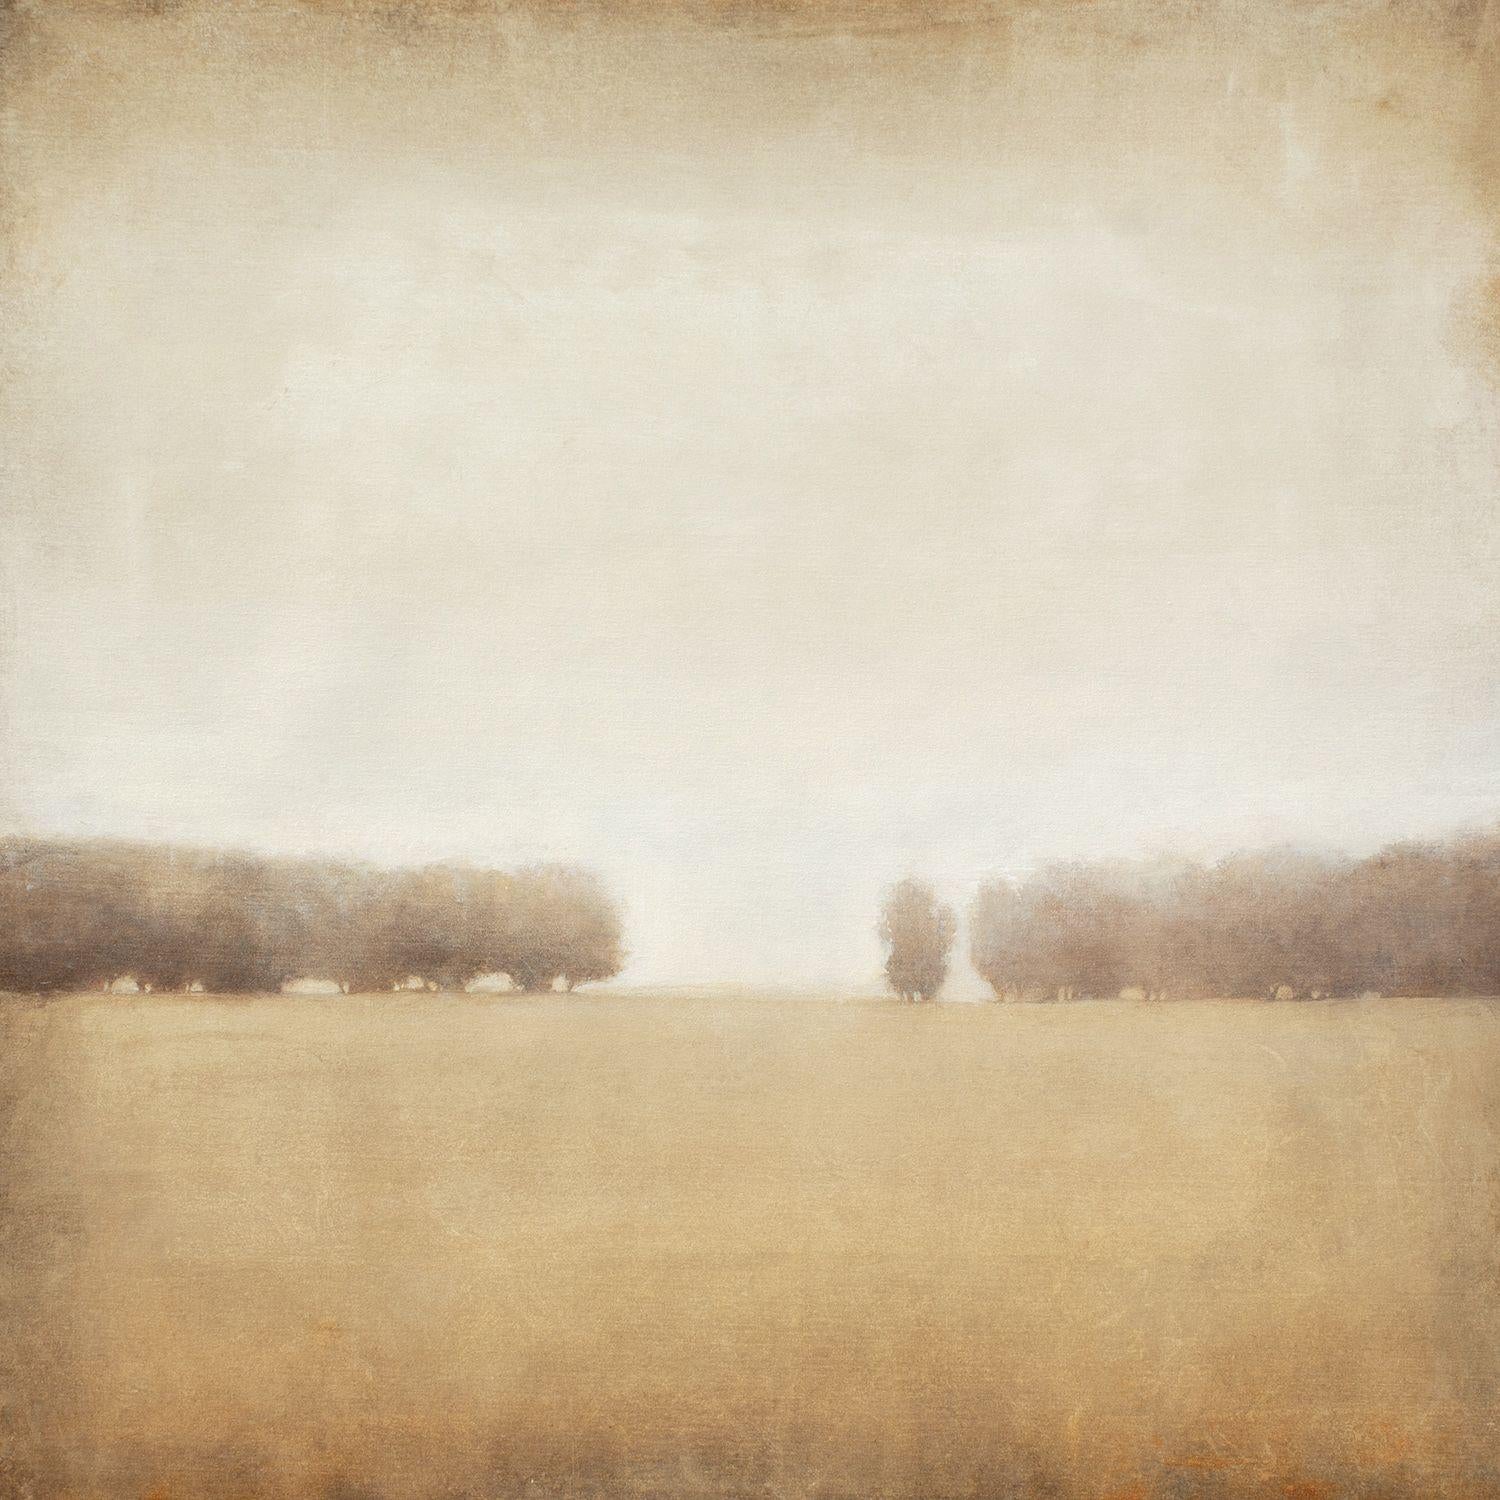 Field And Trees 220316 is a contemporary tonal landscape painting with nice light and atmosphere. This painting is part of my Atmospheric Landscapes series which are modern landscapes with a focus on soft light. These are paintings of calm zen like